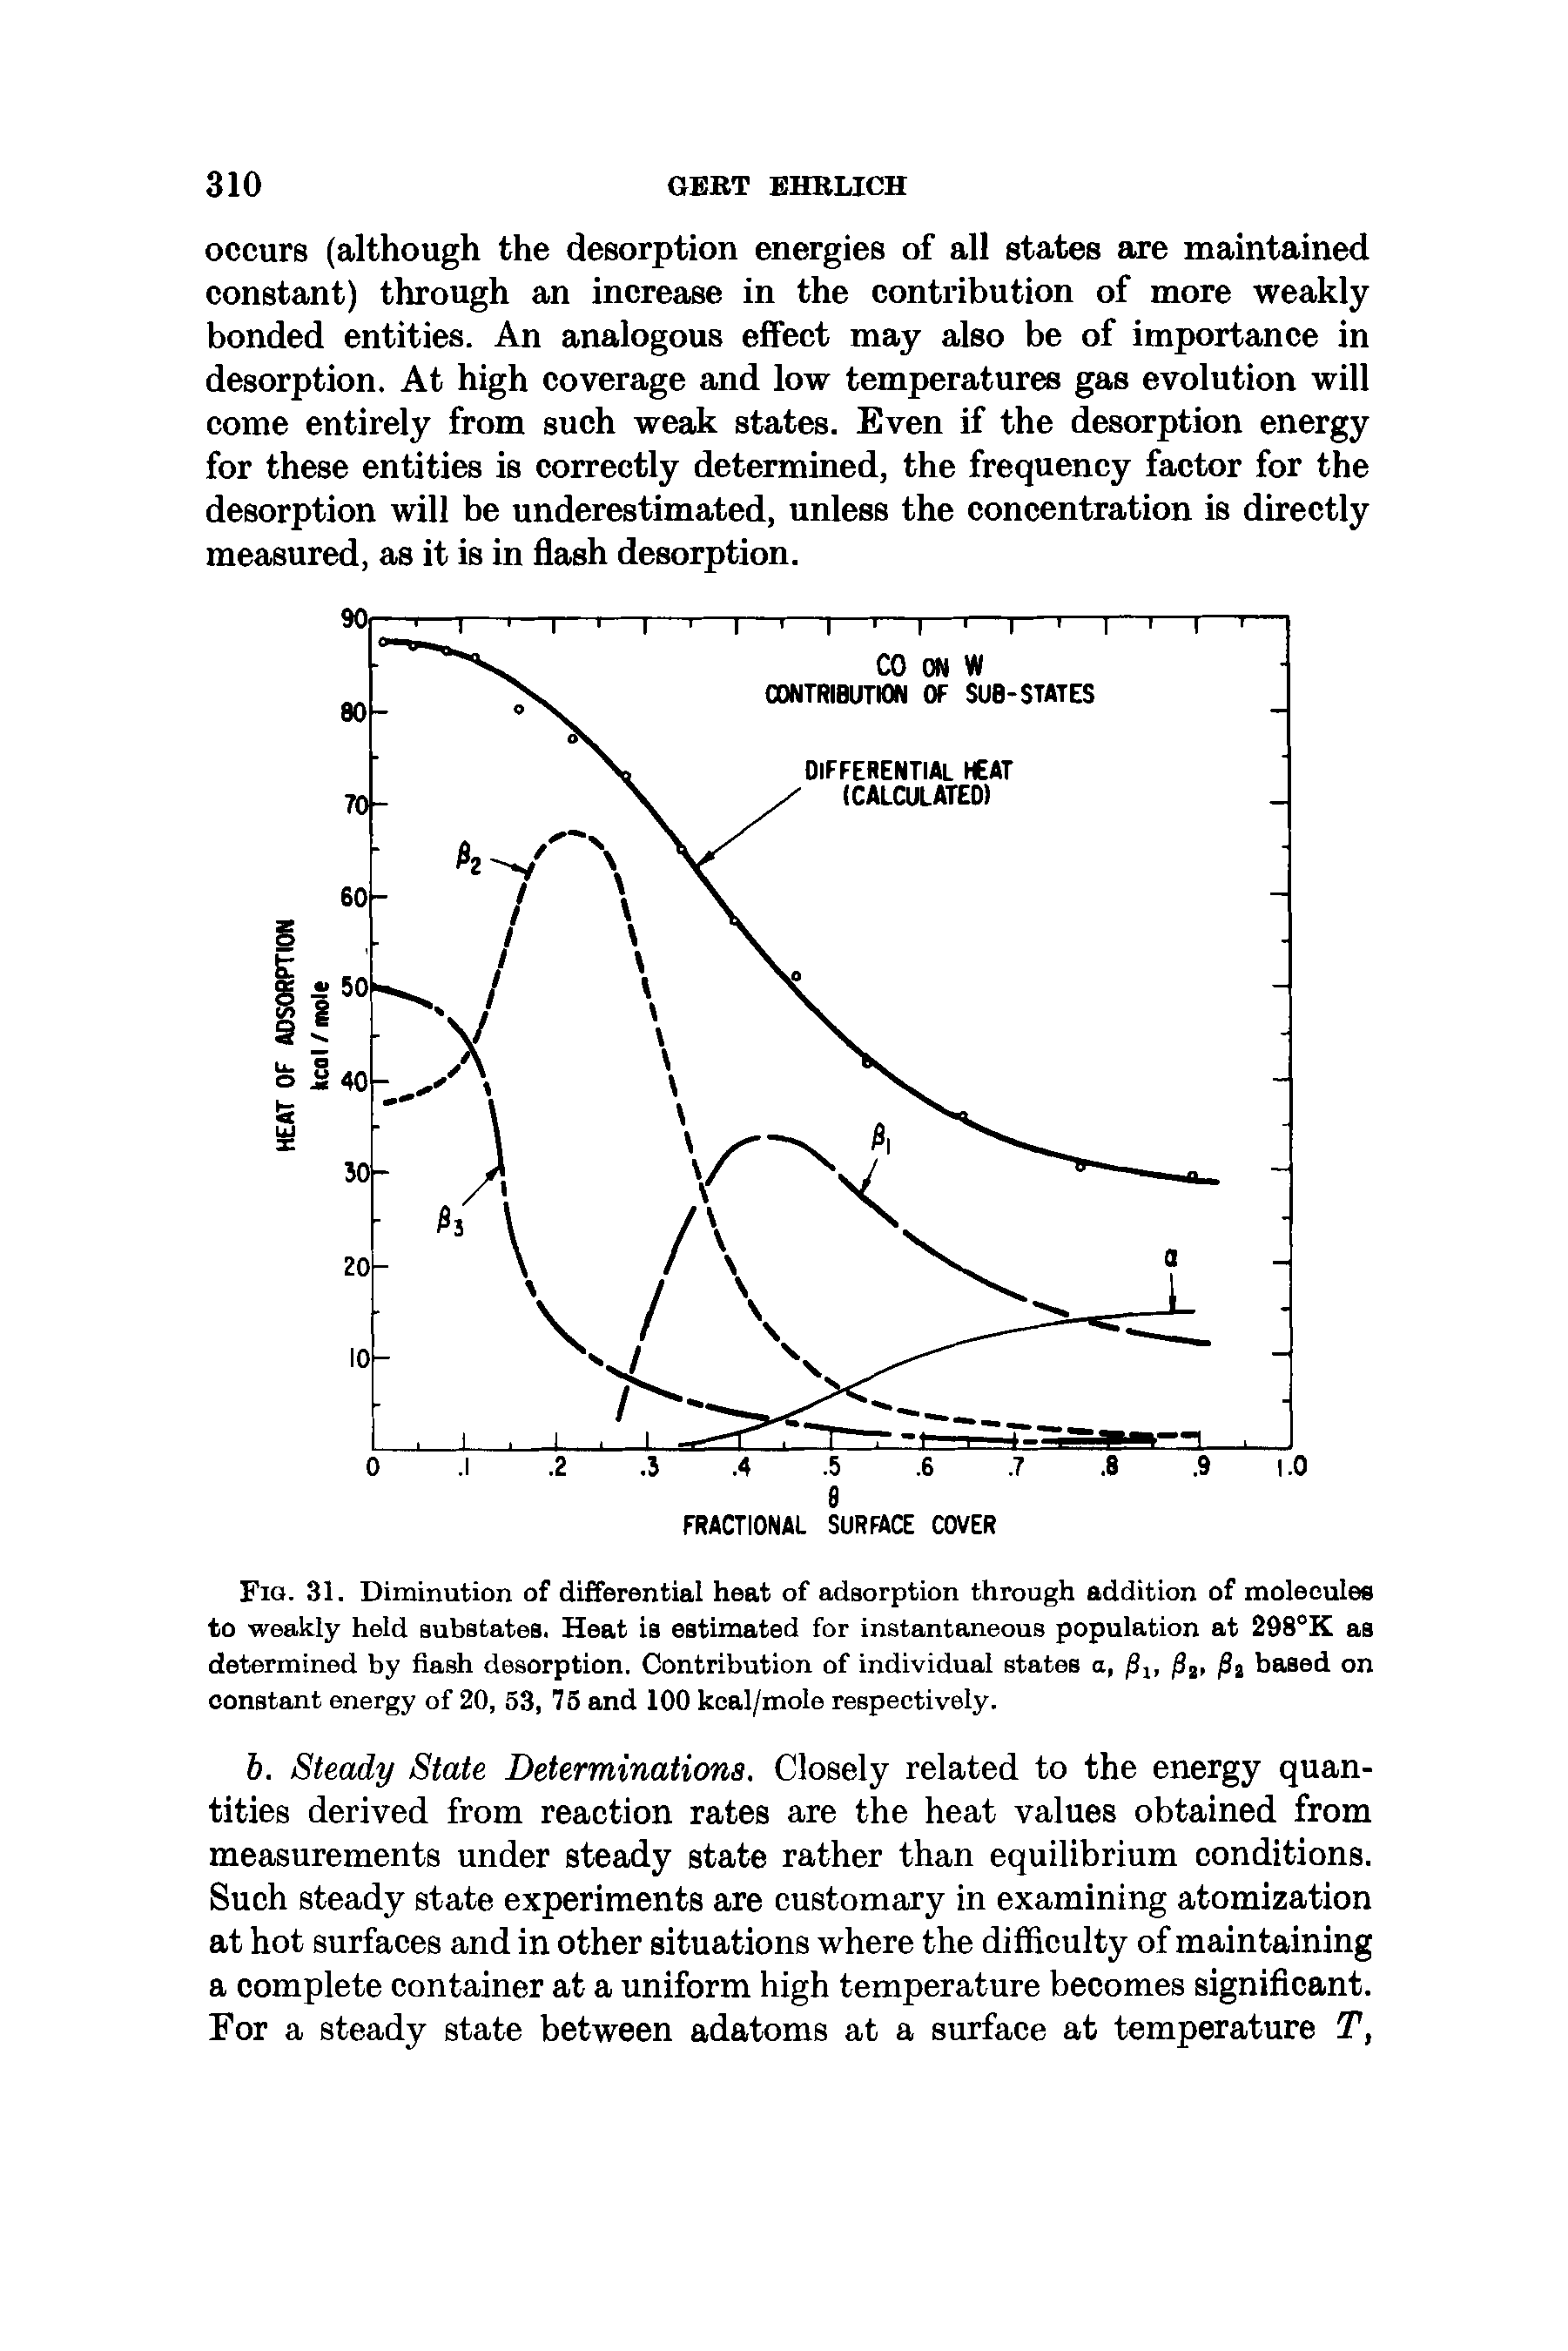 Fig. 31. Diminution of differential heat of adsorption through addition of molecules to weakly held substates. Heat is estimated for instantaneous population at 298°K as determined by flash desorption. Contribution of individual states a, f lt f t, jSj based on constant energy of 20, 53, 75 and 100 keal/mole respectively.